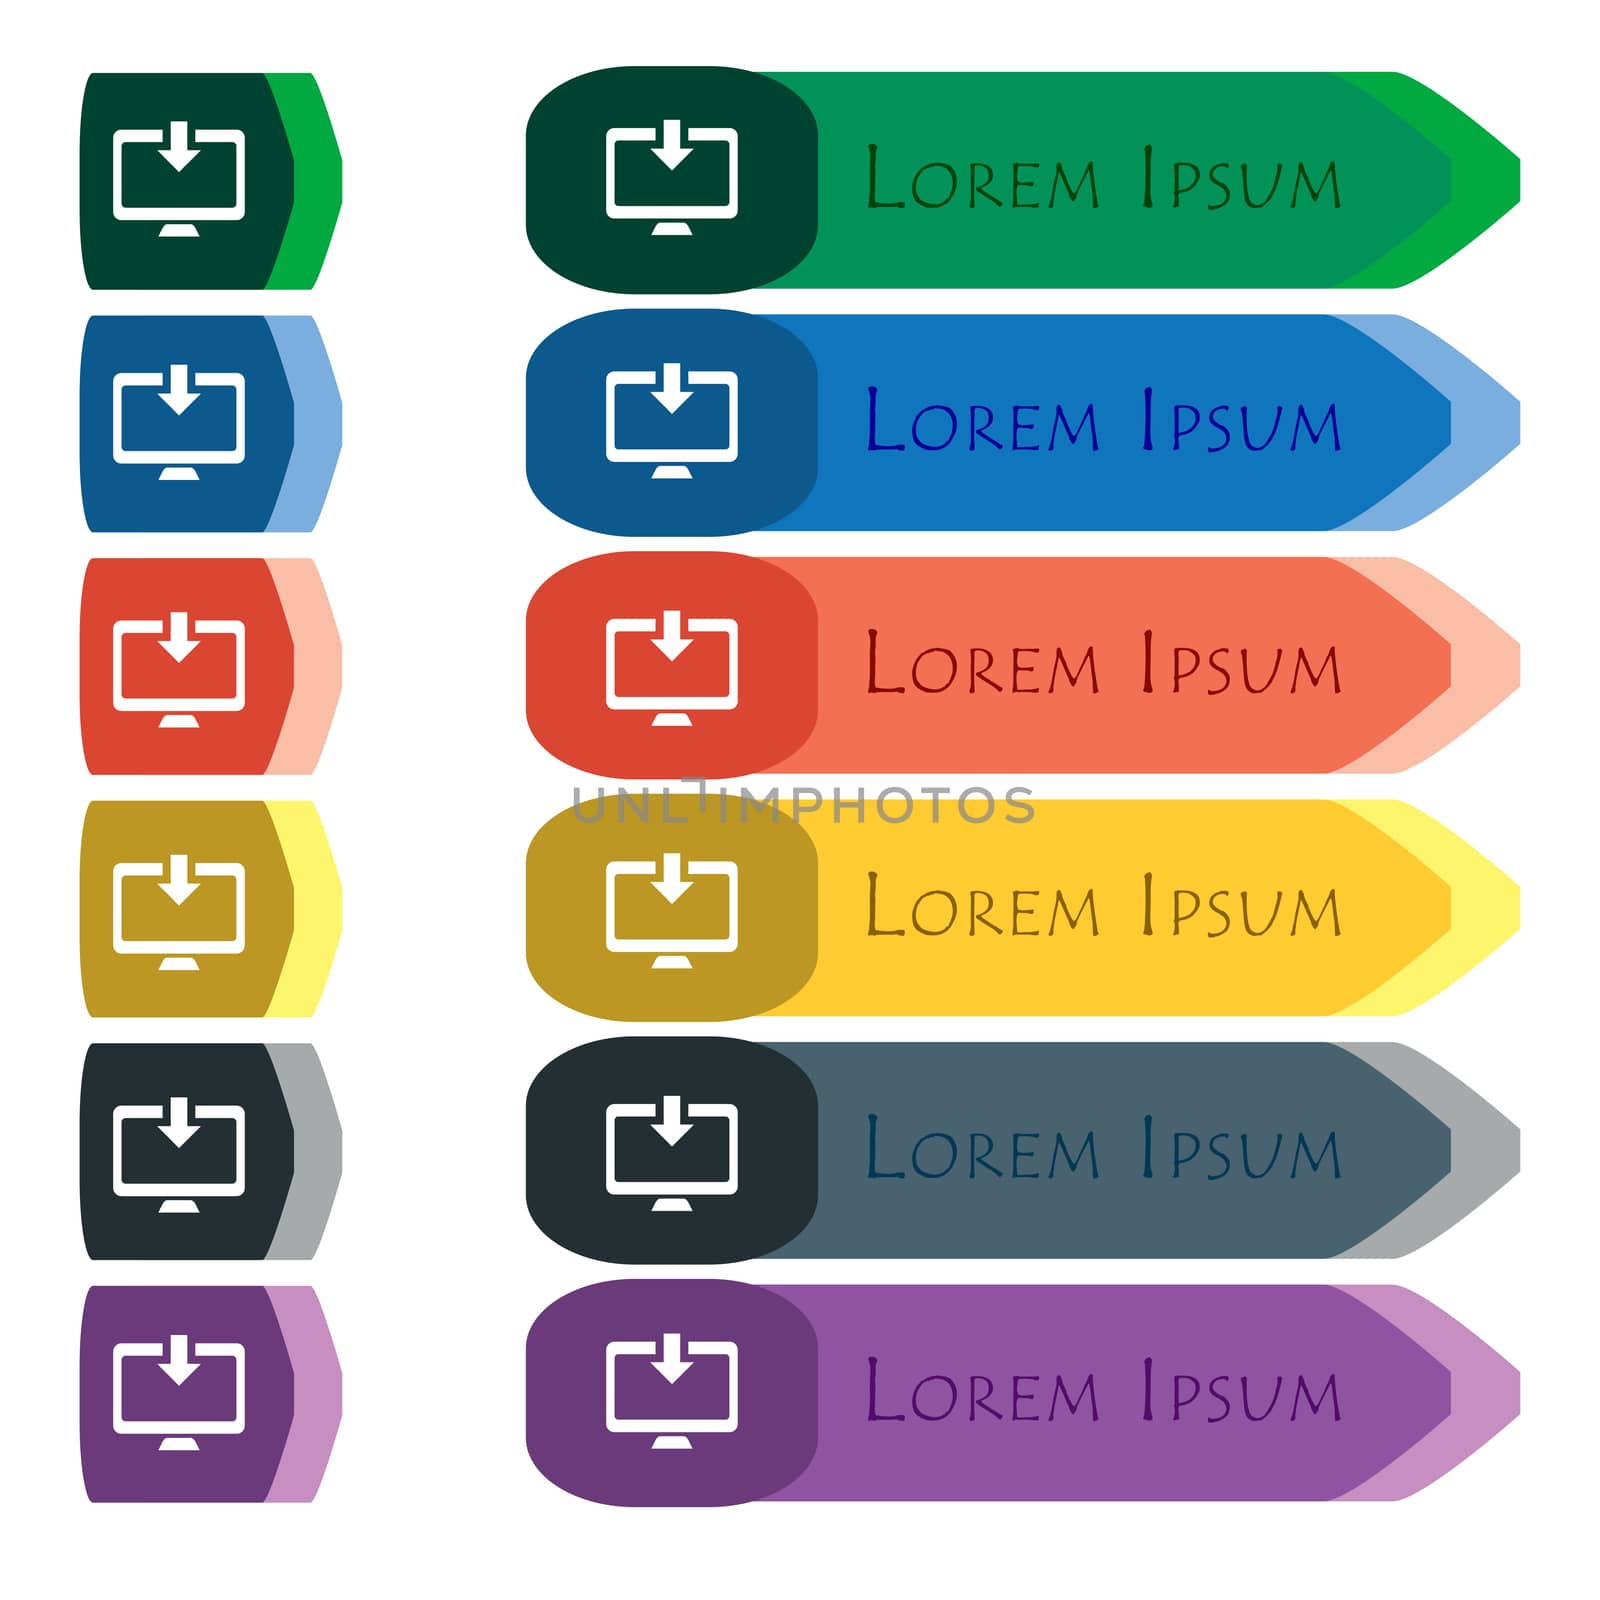 Download, Load, Backup icon sign. Set of colorful, bright long buttons with additional small modules. Flat design. 